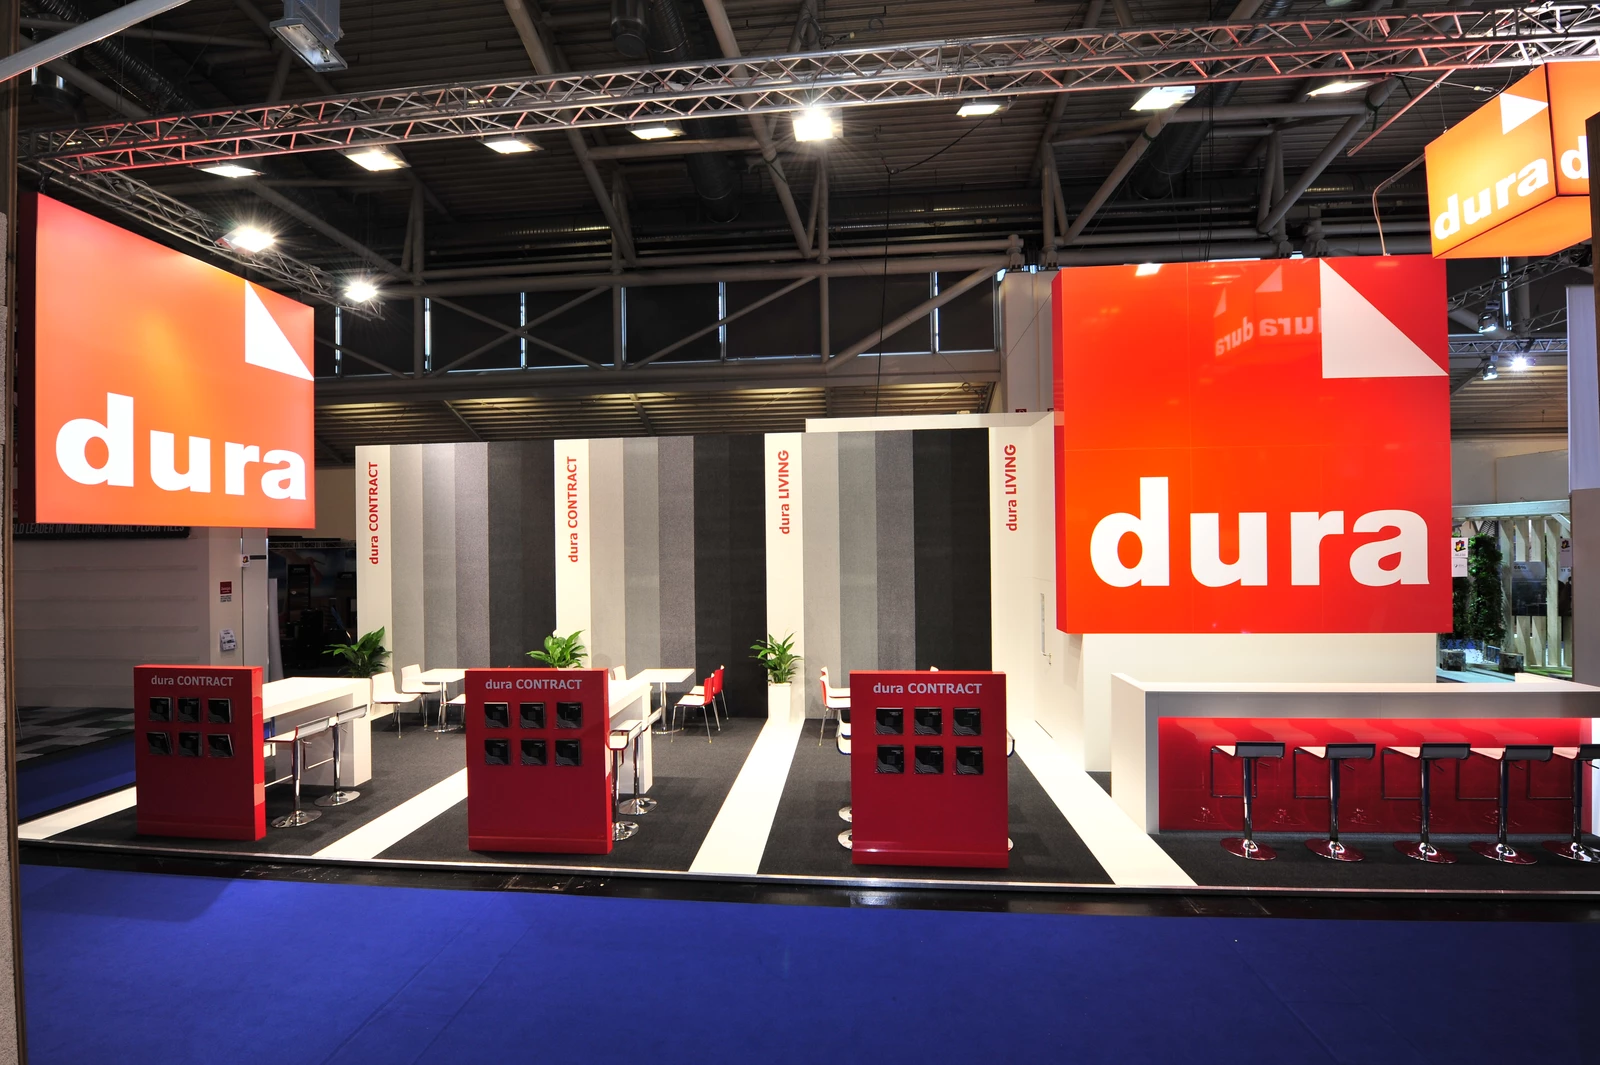 Dura Messestand by SYMA